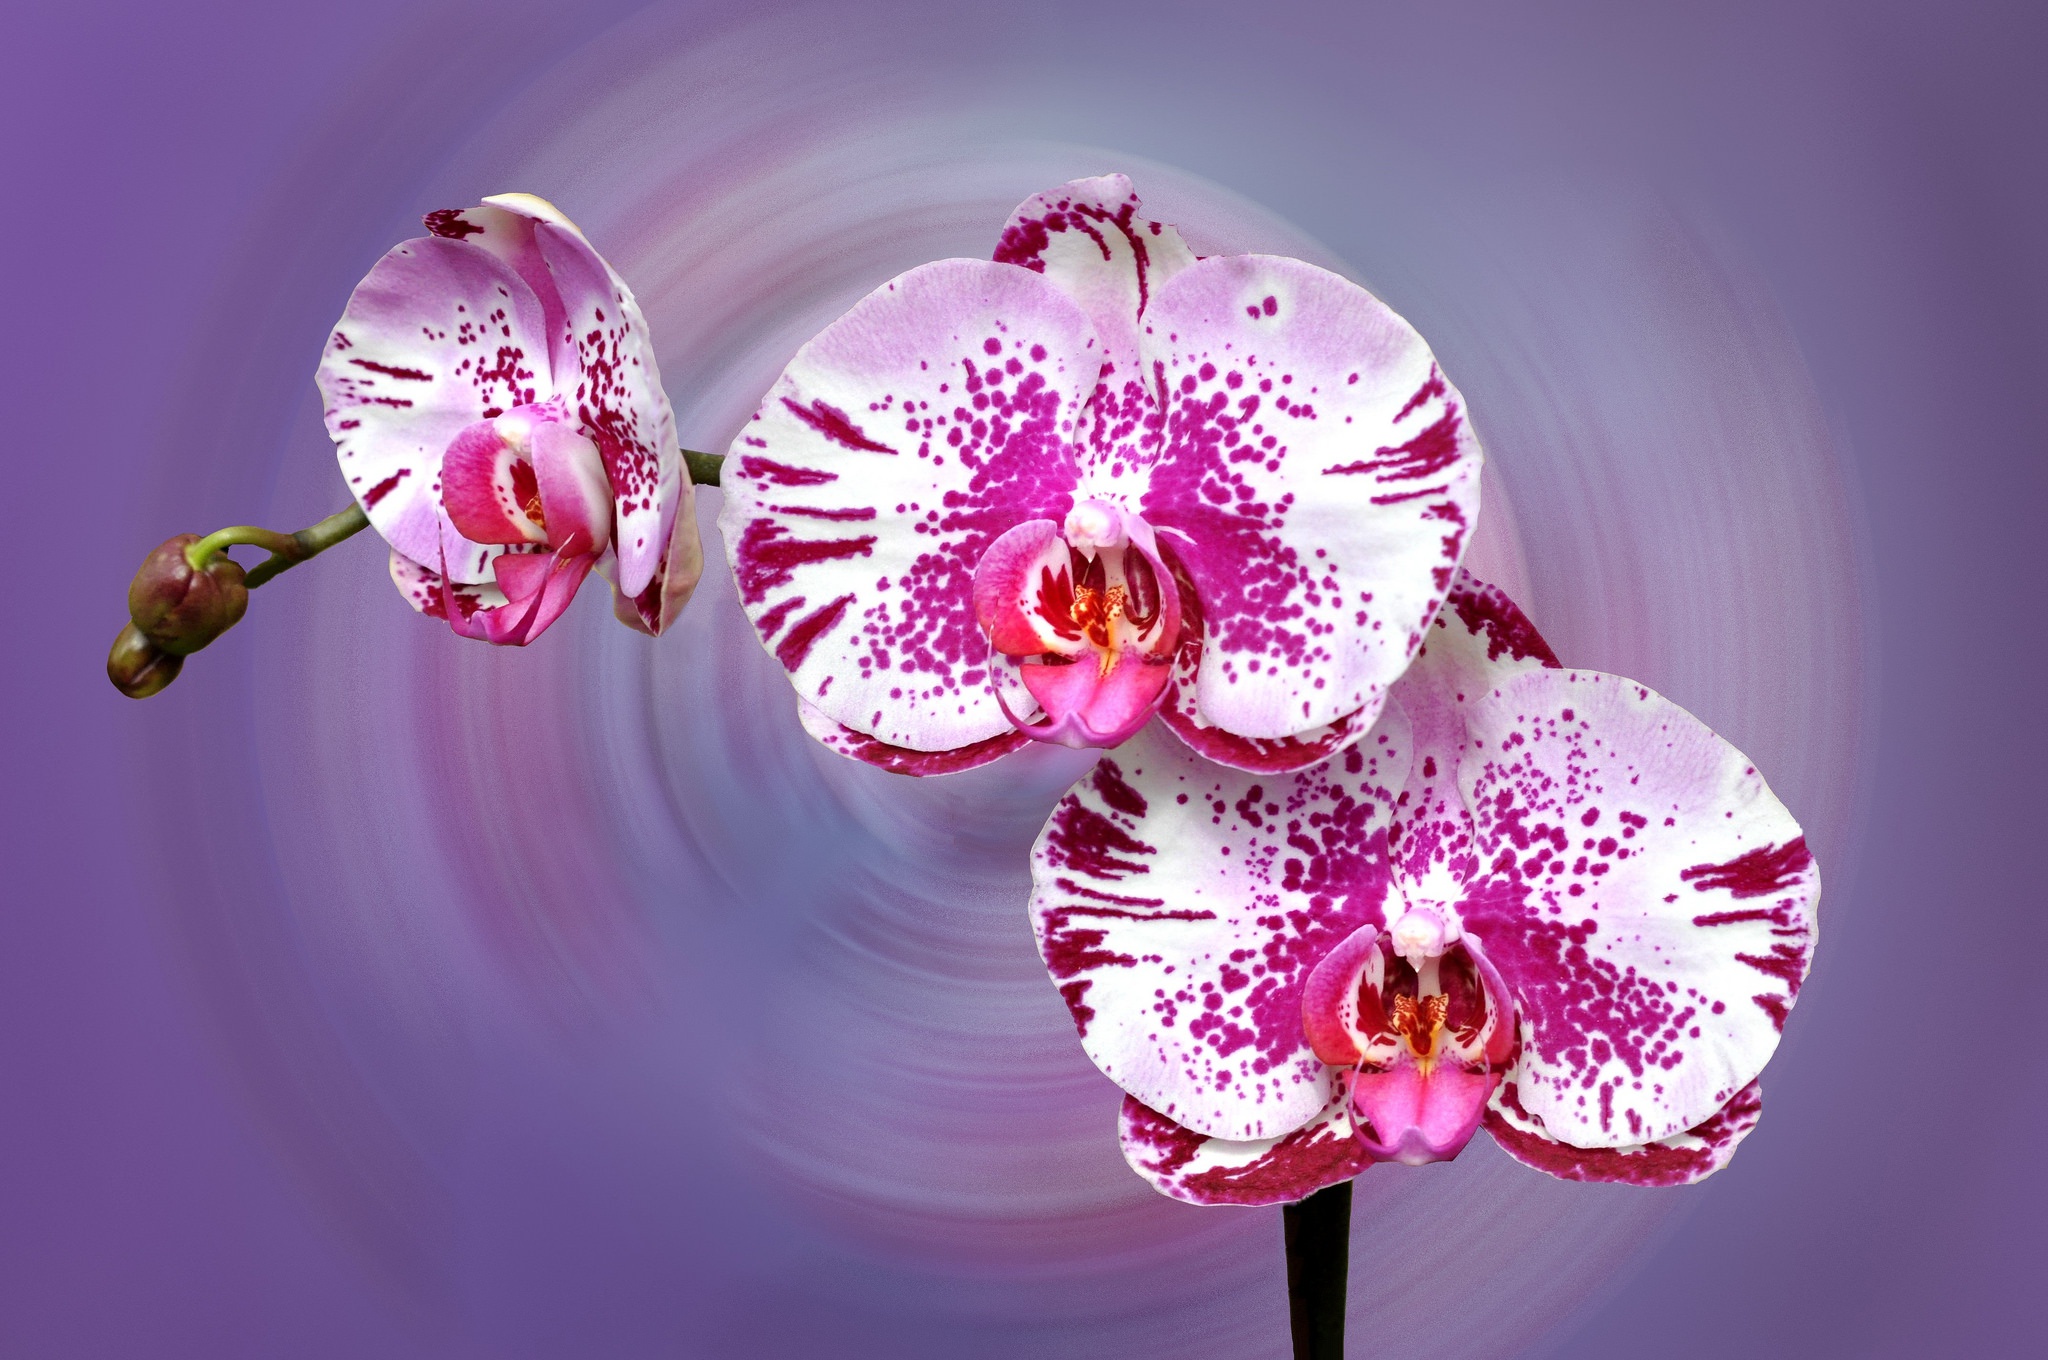 Earth Orchid 2048x1360